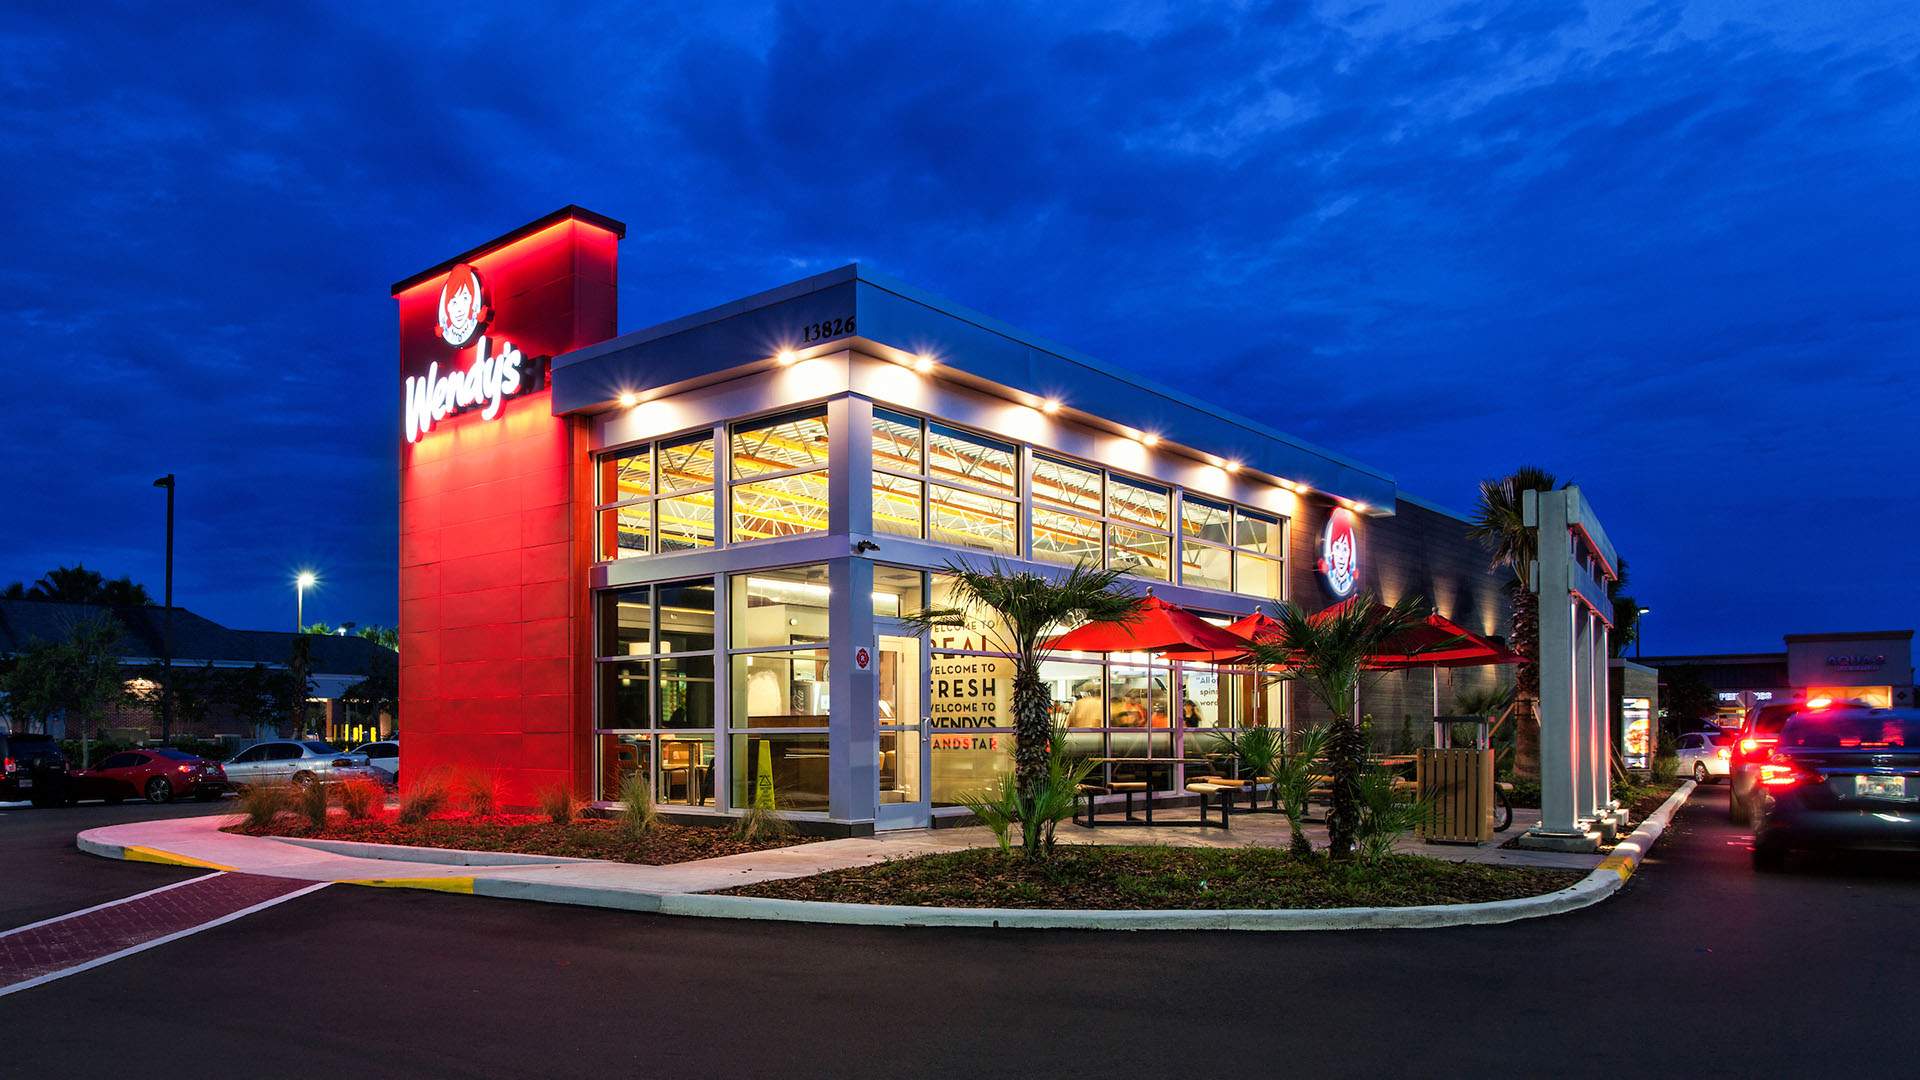 US Burger Chain Wendy's Just Cooked Up a Deal to Open 200 Stores in Australia by 2034